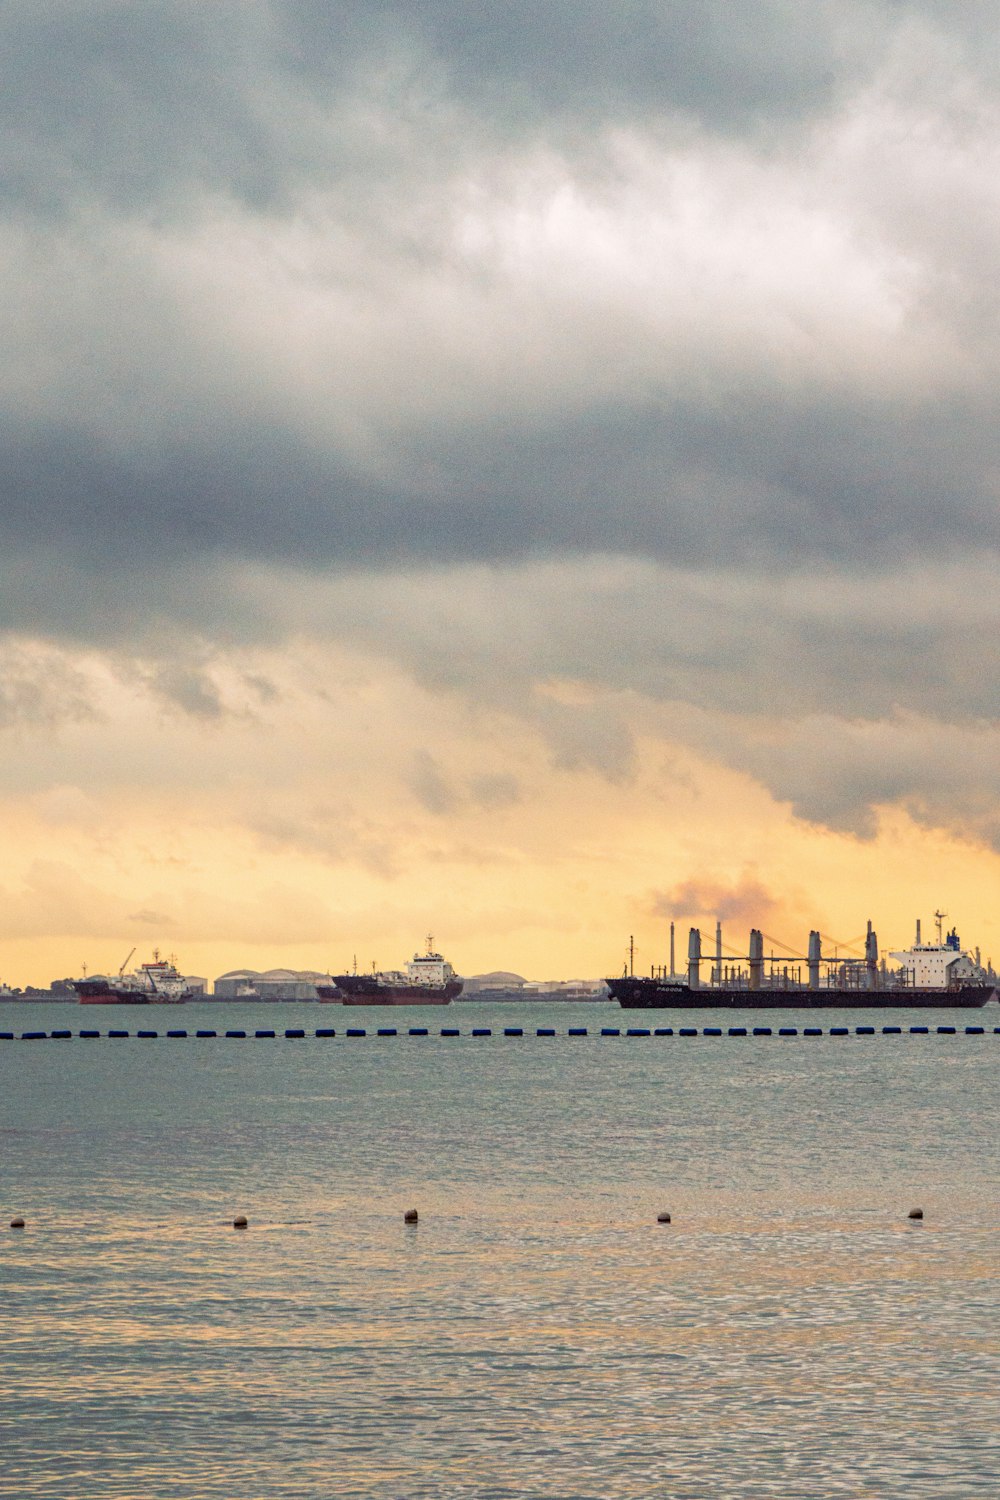 a large cargo ship in the distance under a cloudy sky